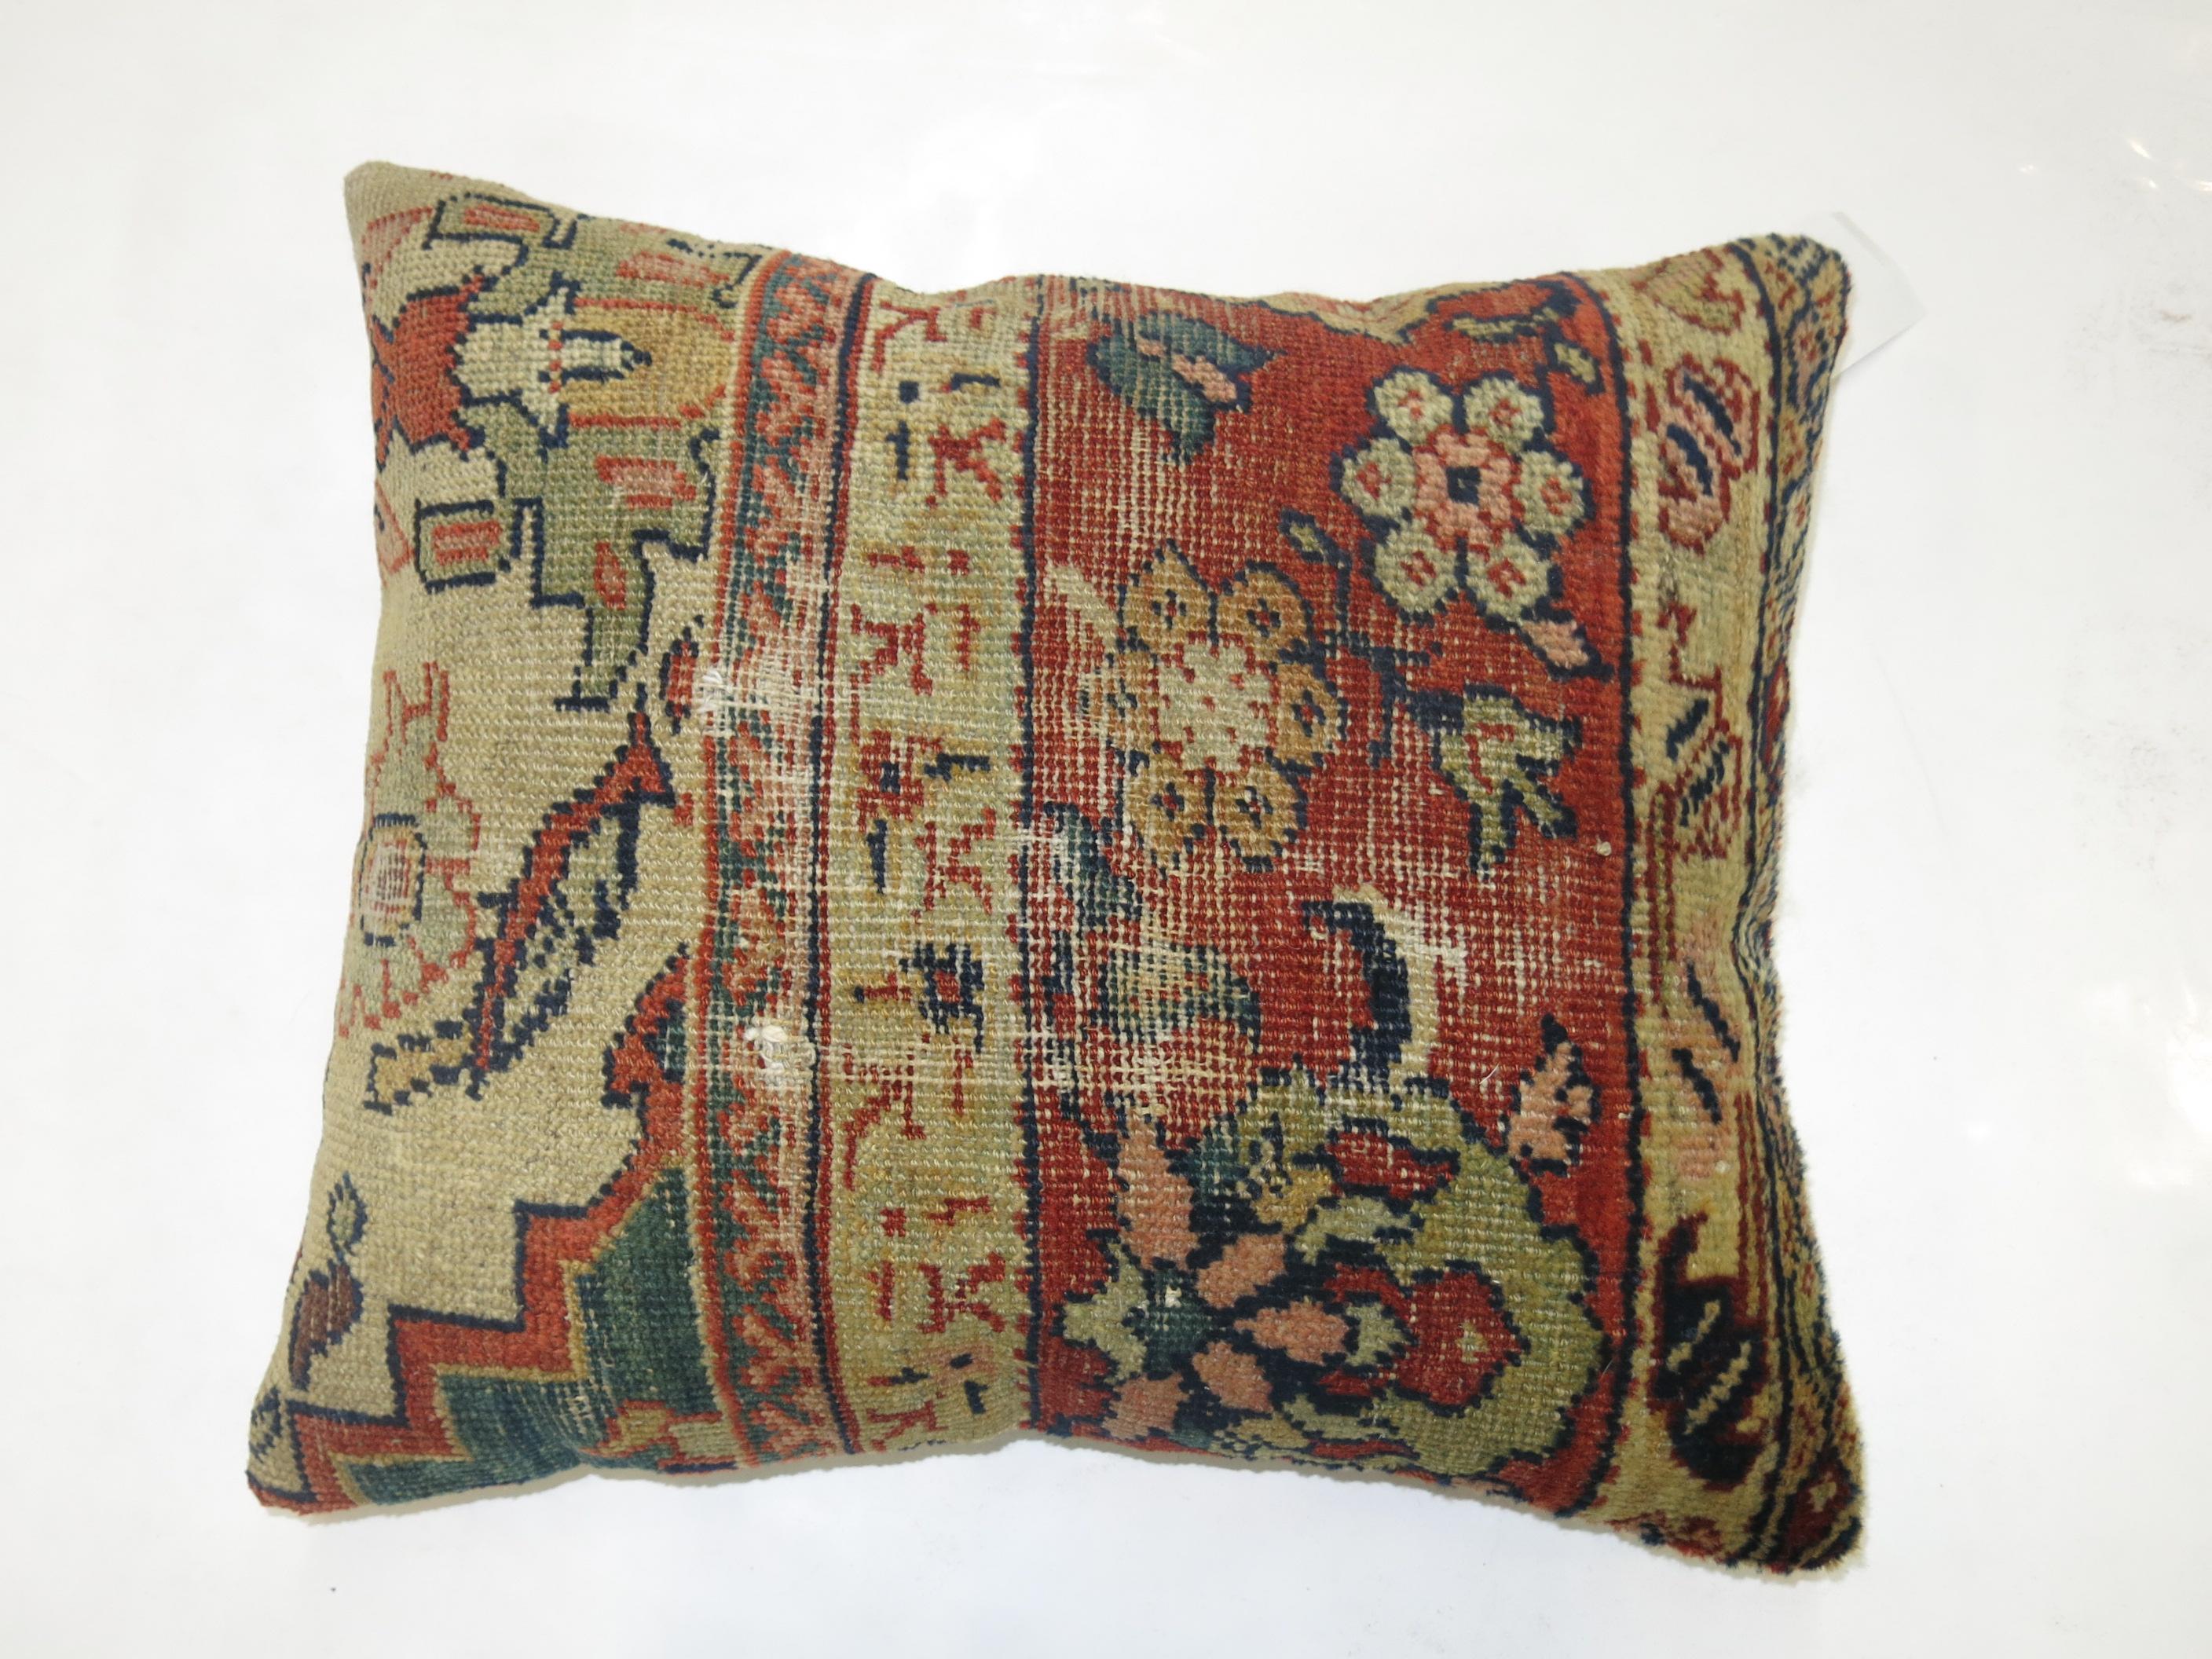 Pillow made from an antique Persian Sultanabad rug with cotton back. Zipper closure. Age wear.

19'' x 21''